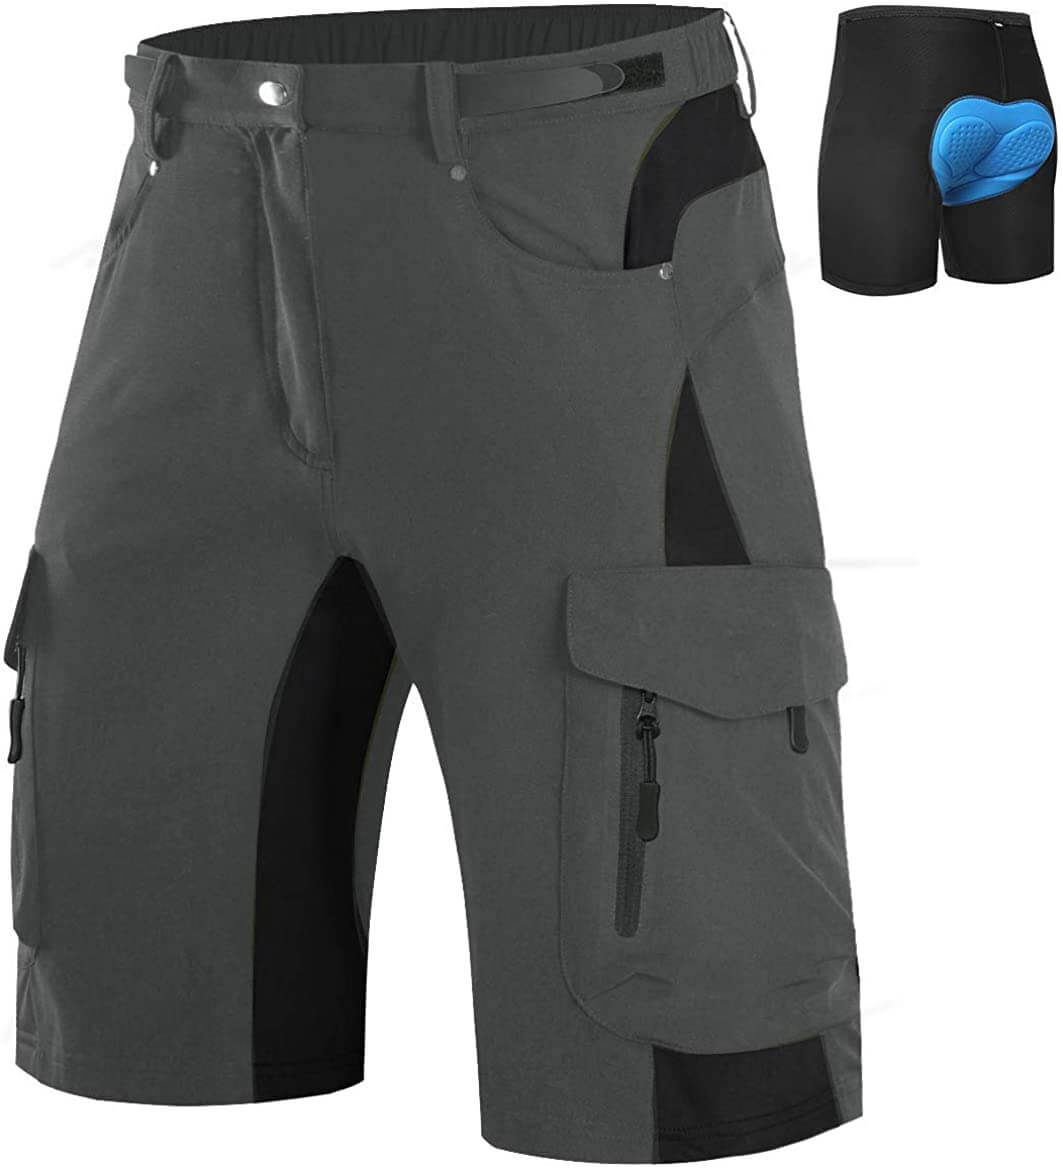 Men's Quick Dry Stretchy Mountain Bike Shorts 06